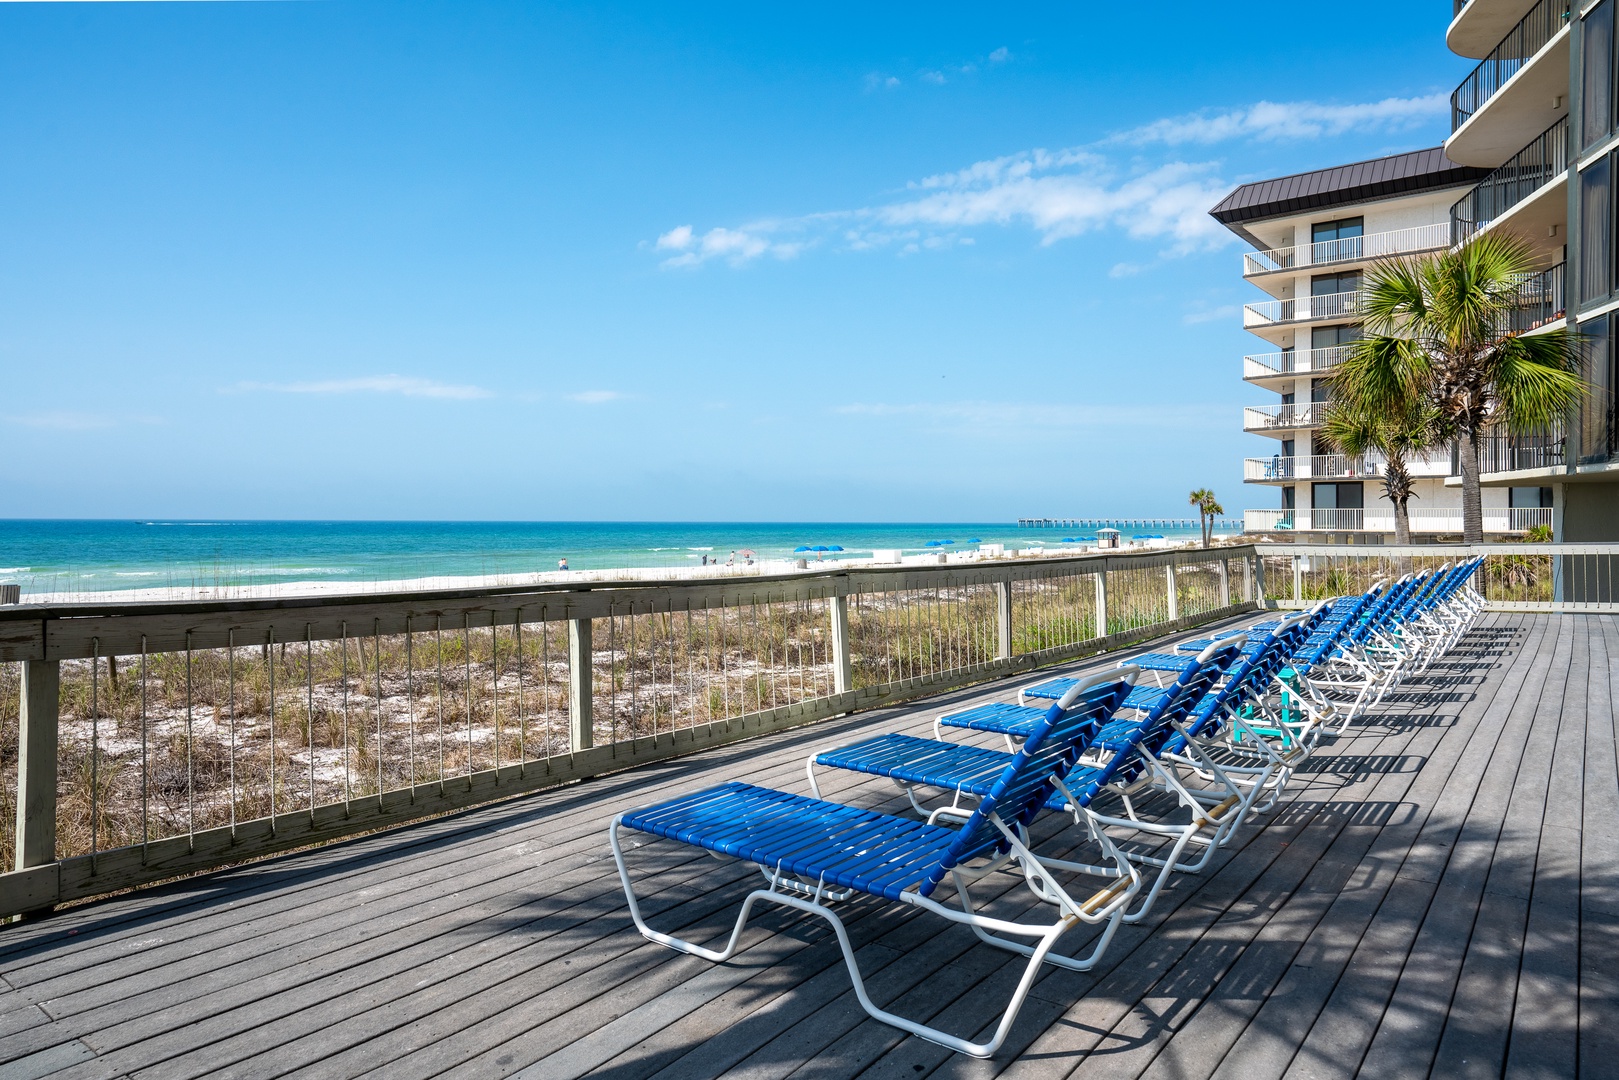 Lounge your days away with views of the Gulf